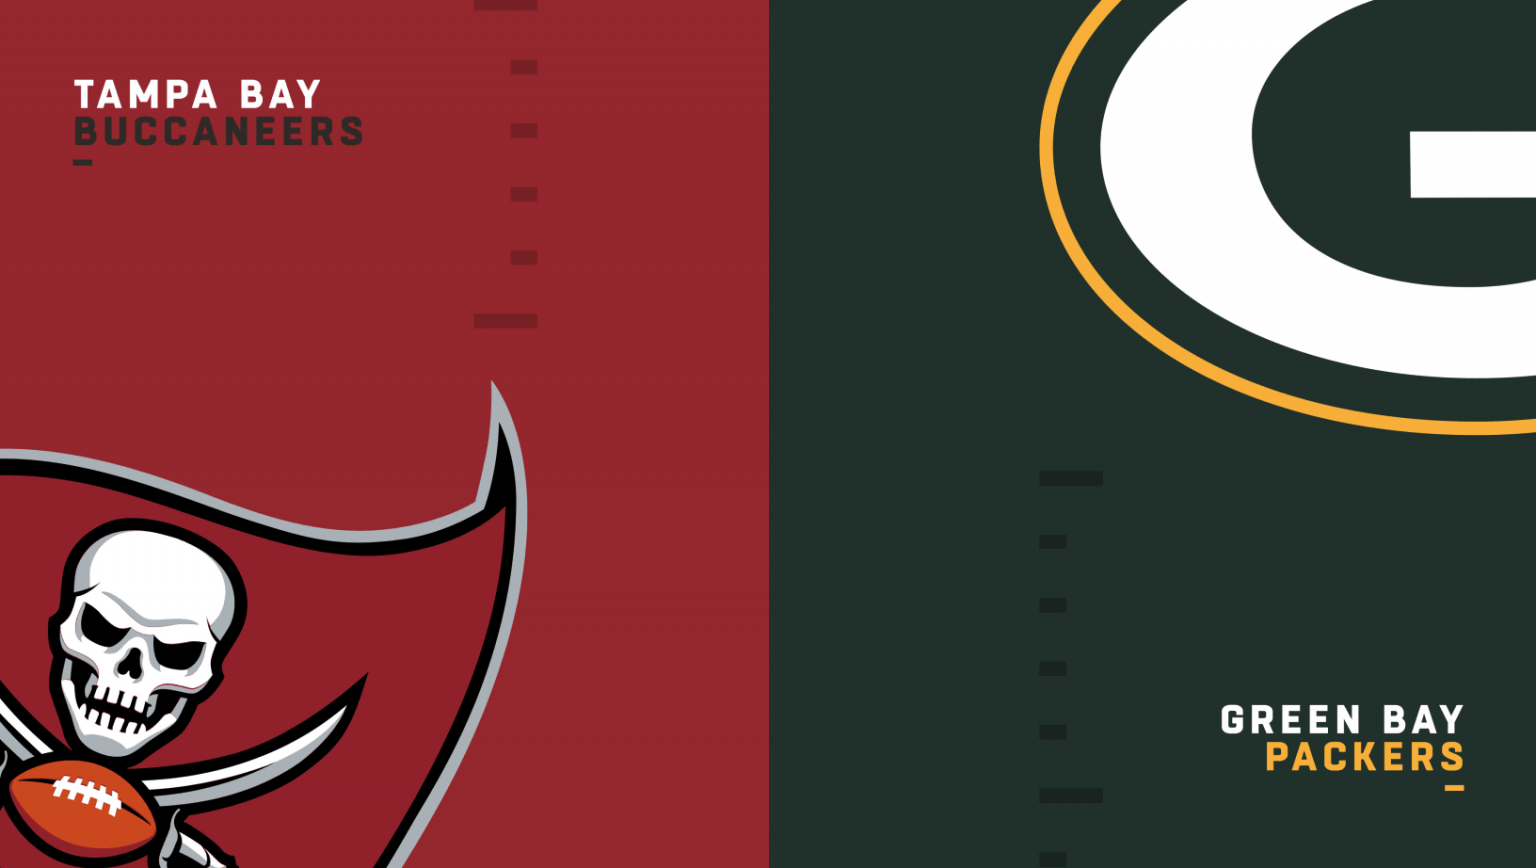 What Channel & Time is the Bucs vs. Packers NFC Championship?